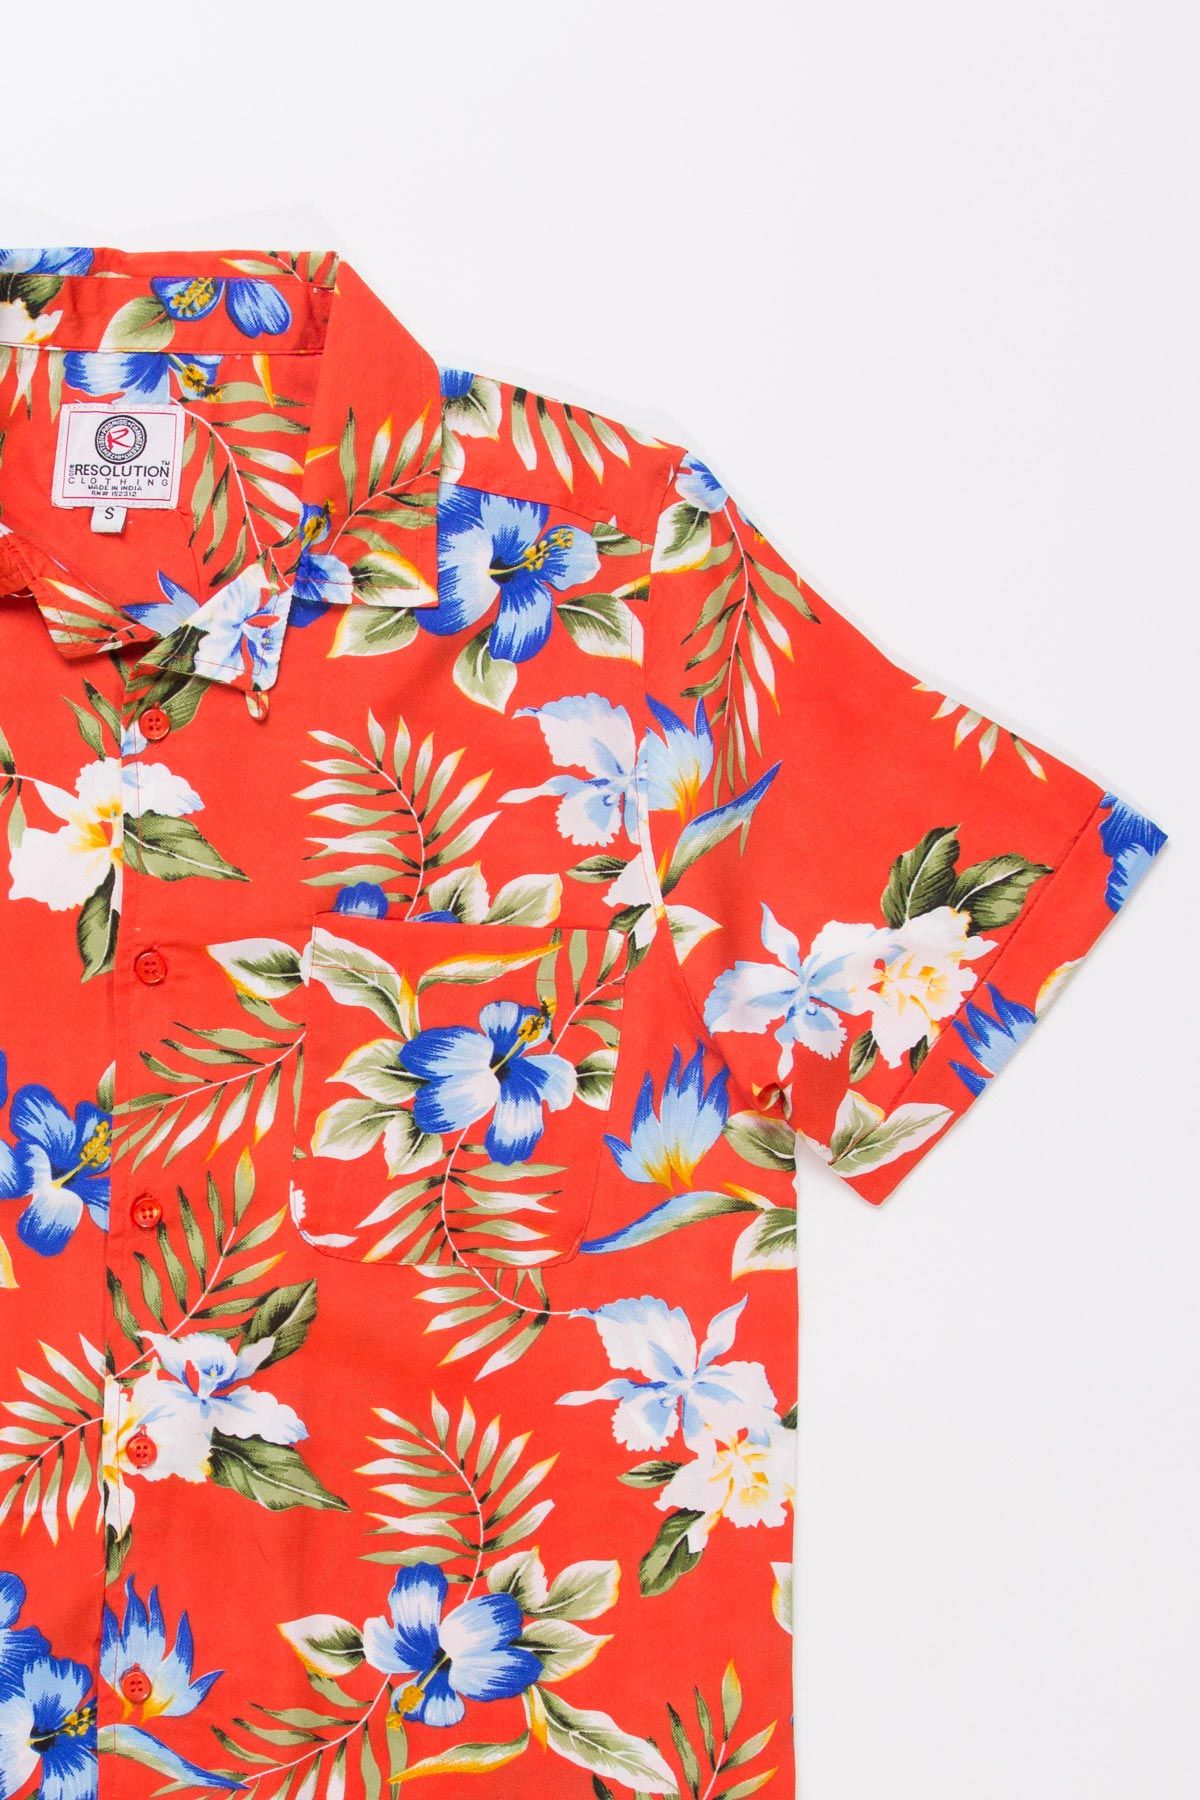 How to Style Red Hawaiian Shirt: Best 10 Cheerful & Sharp Outfits for Ladies